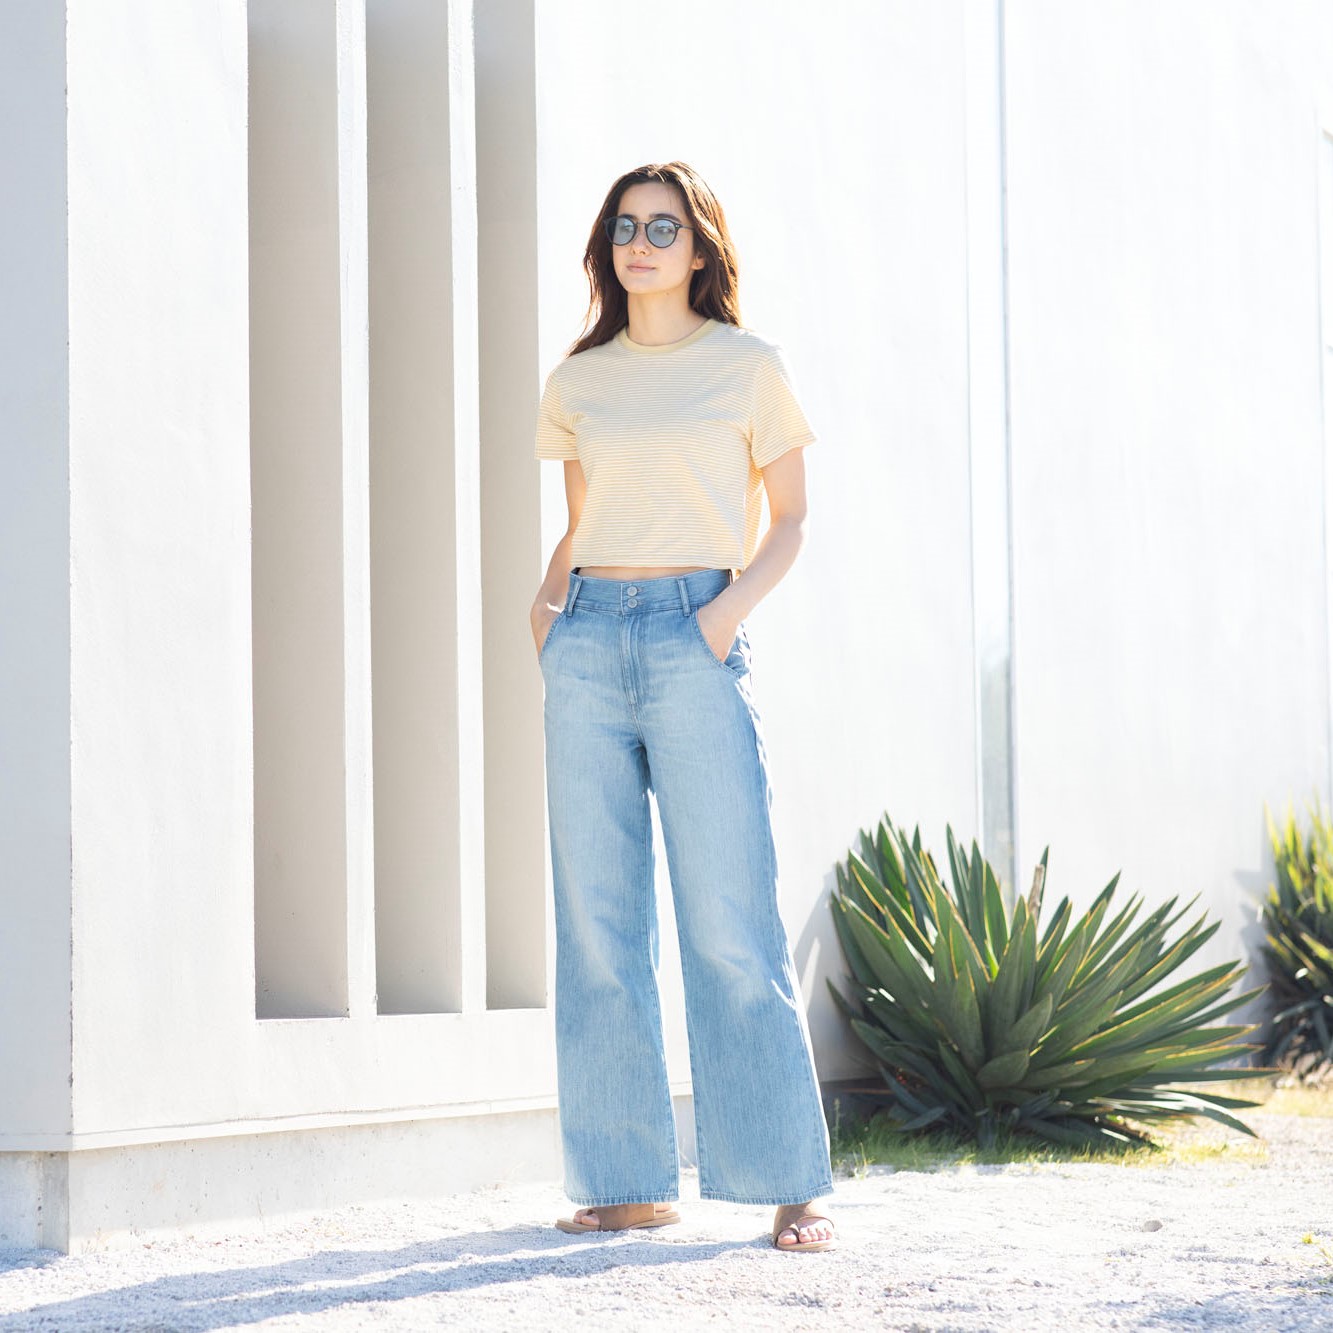 UNIQLO on X: Essential denim in an up-to-date silhouette for the